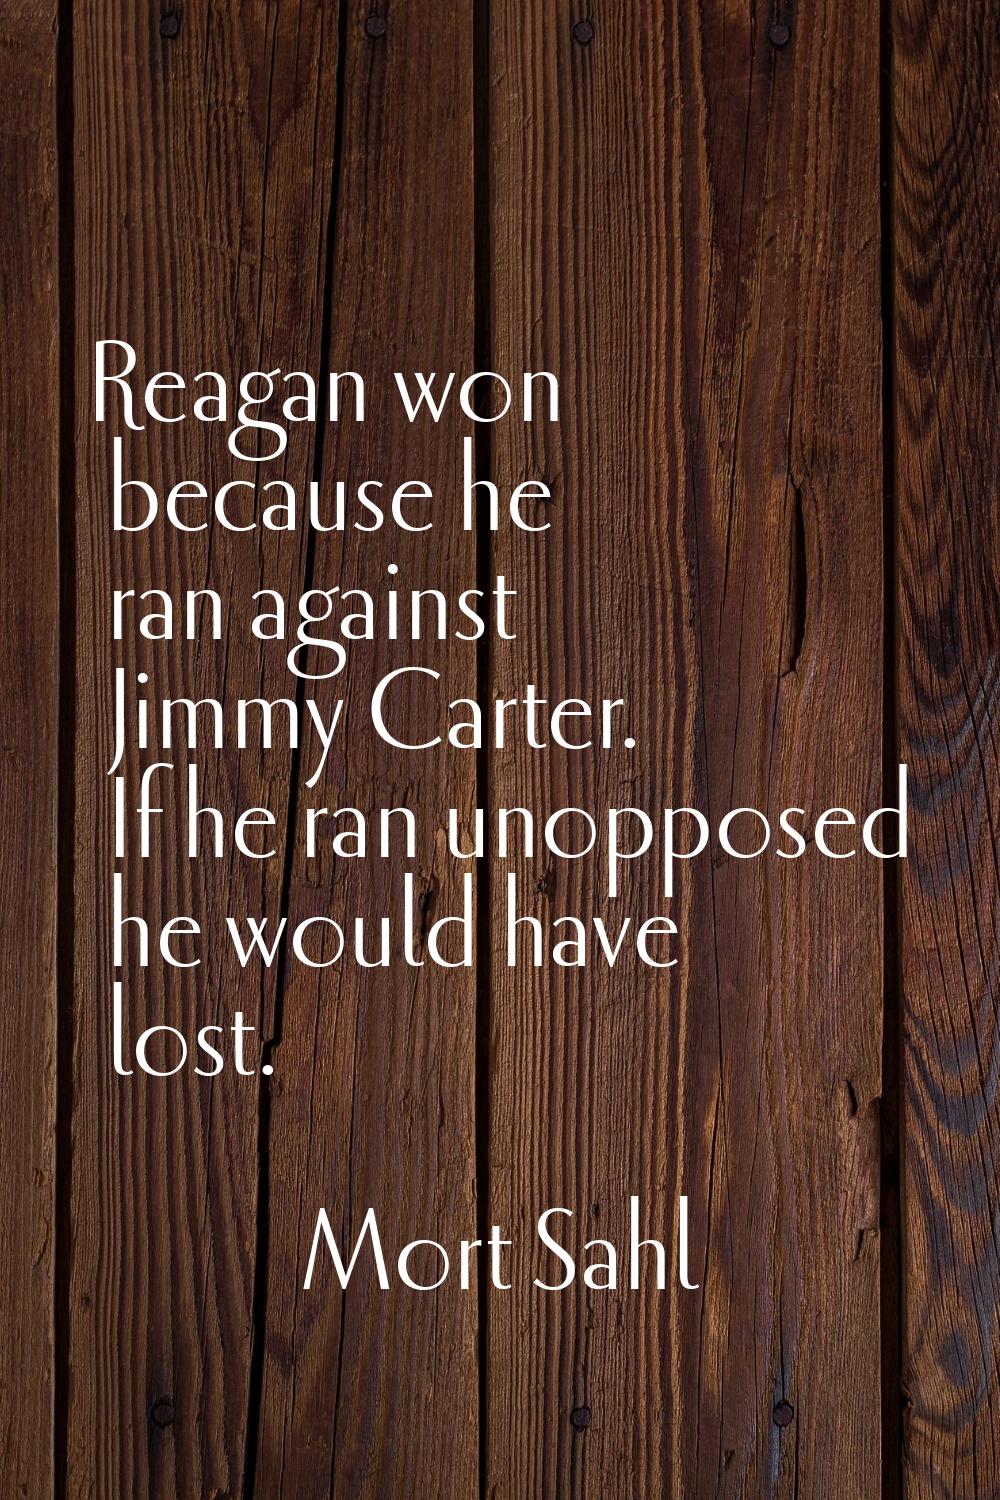 Reagan won because he ran against Jimmy Carter. If he ran unopposed he would have lost.